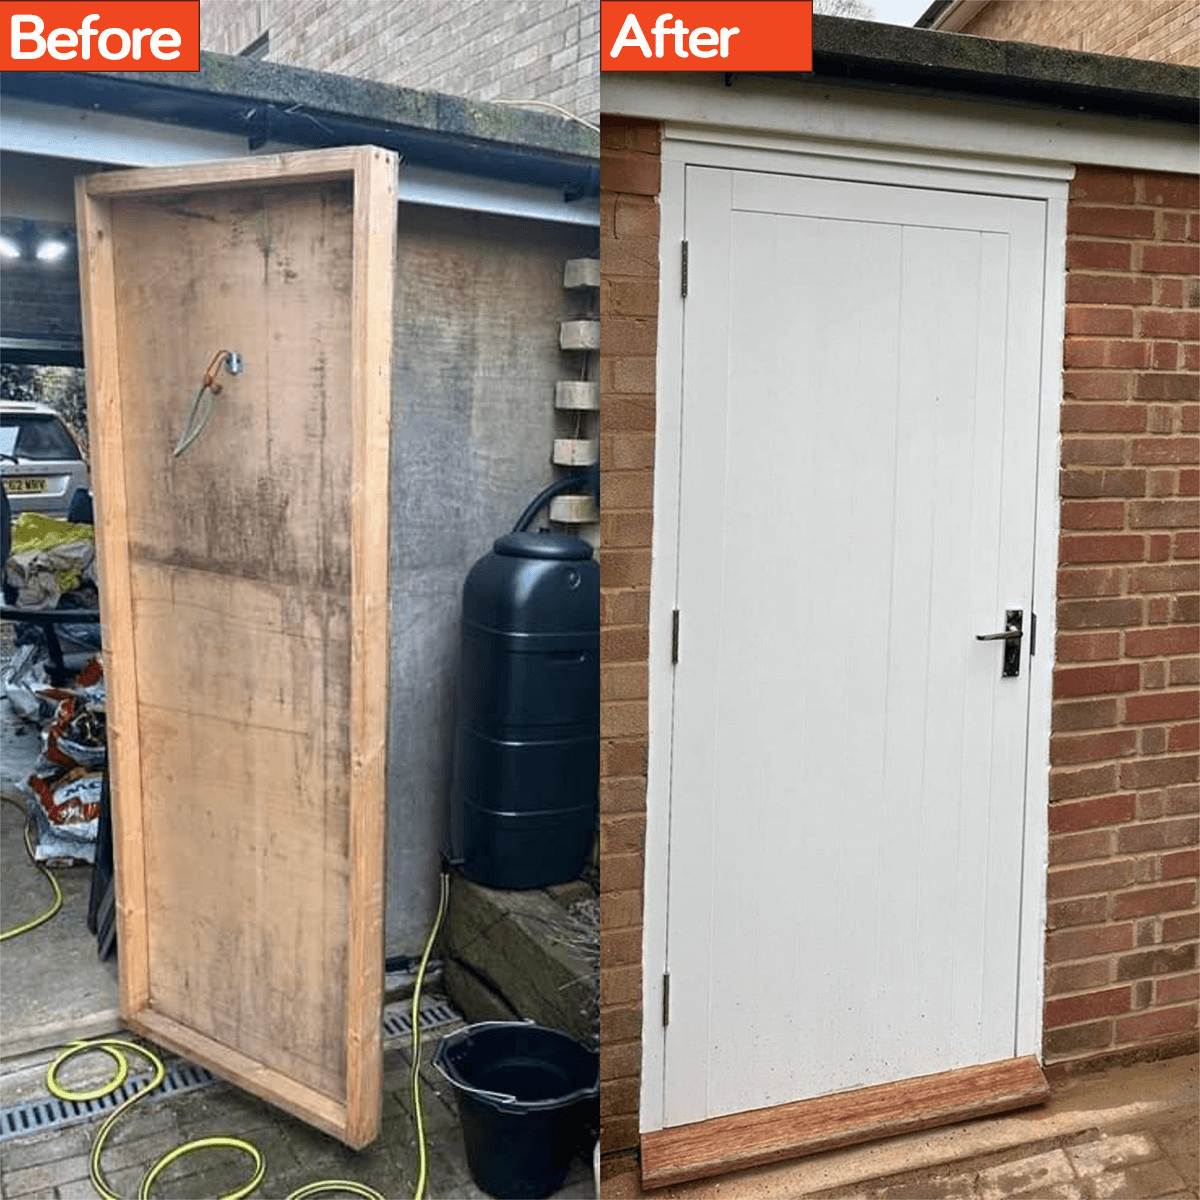 Before & After images of a door